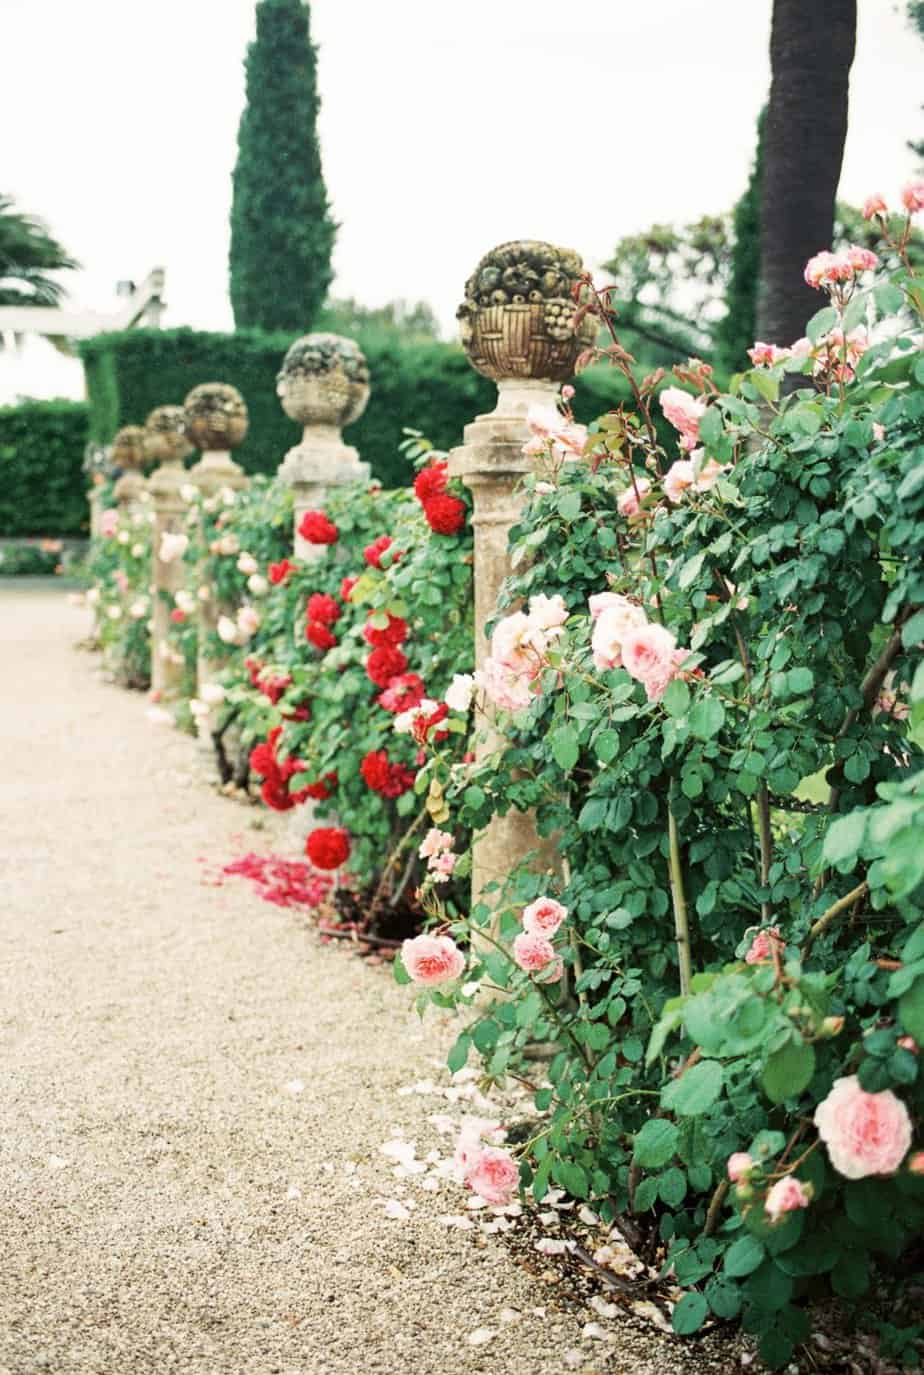 Rose climbers along the path